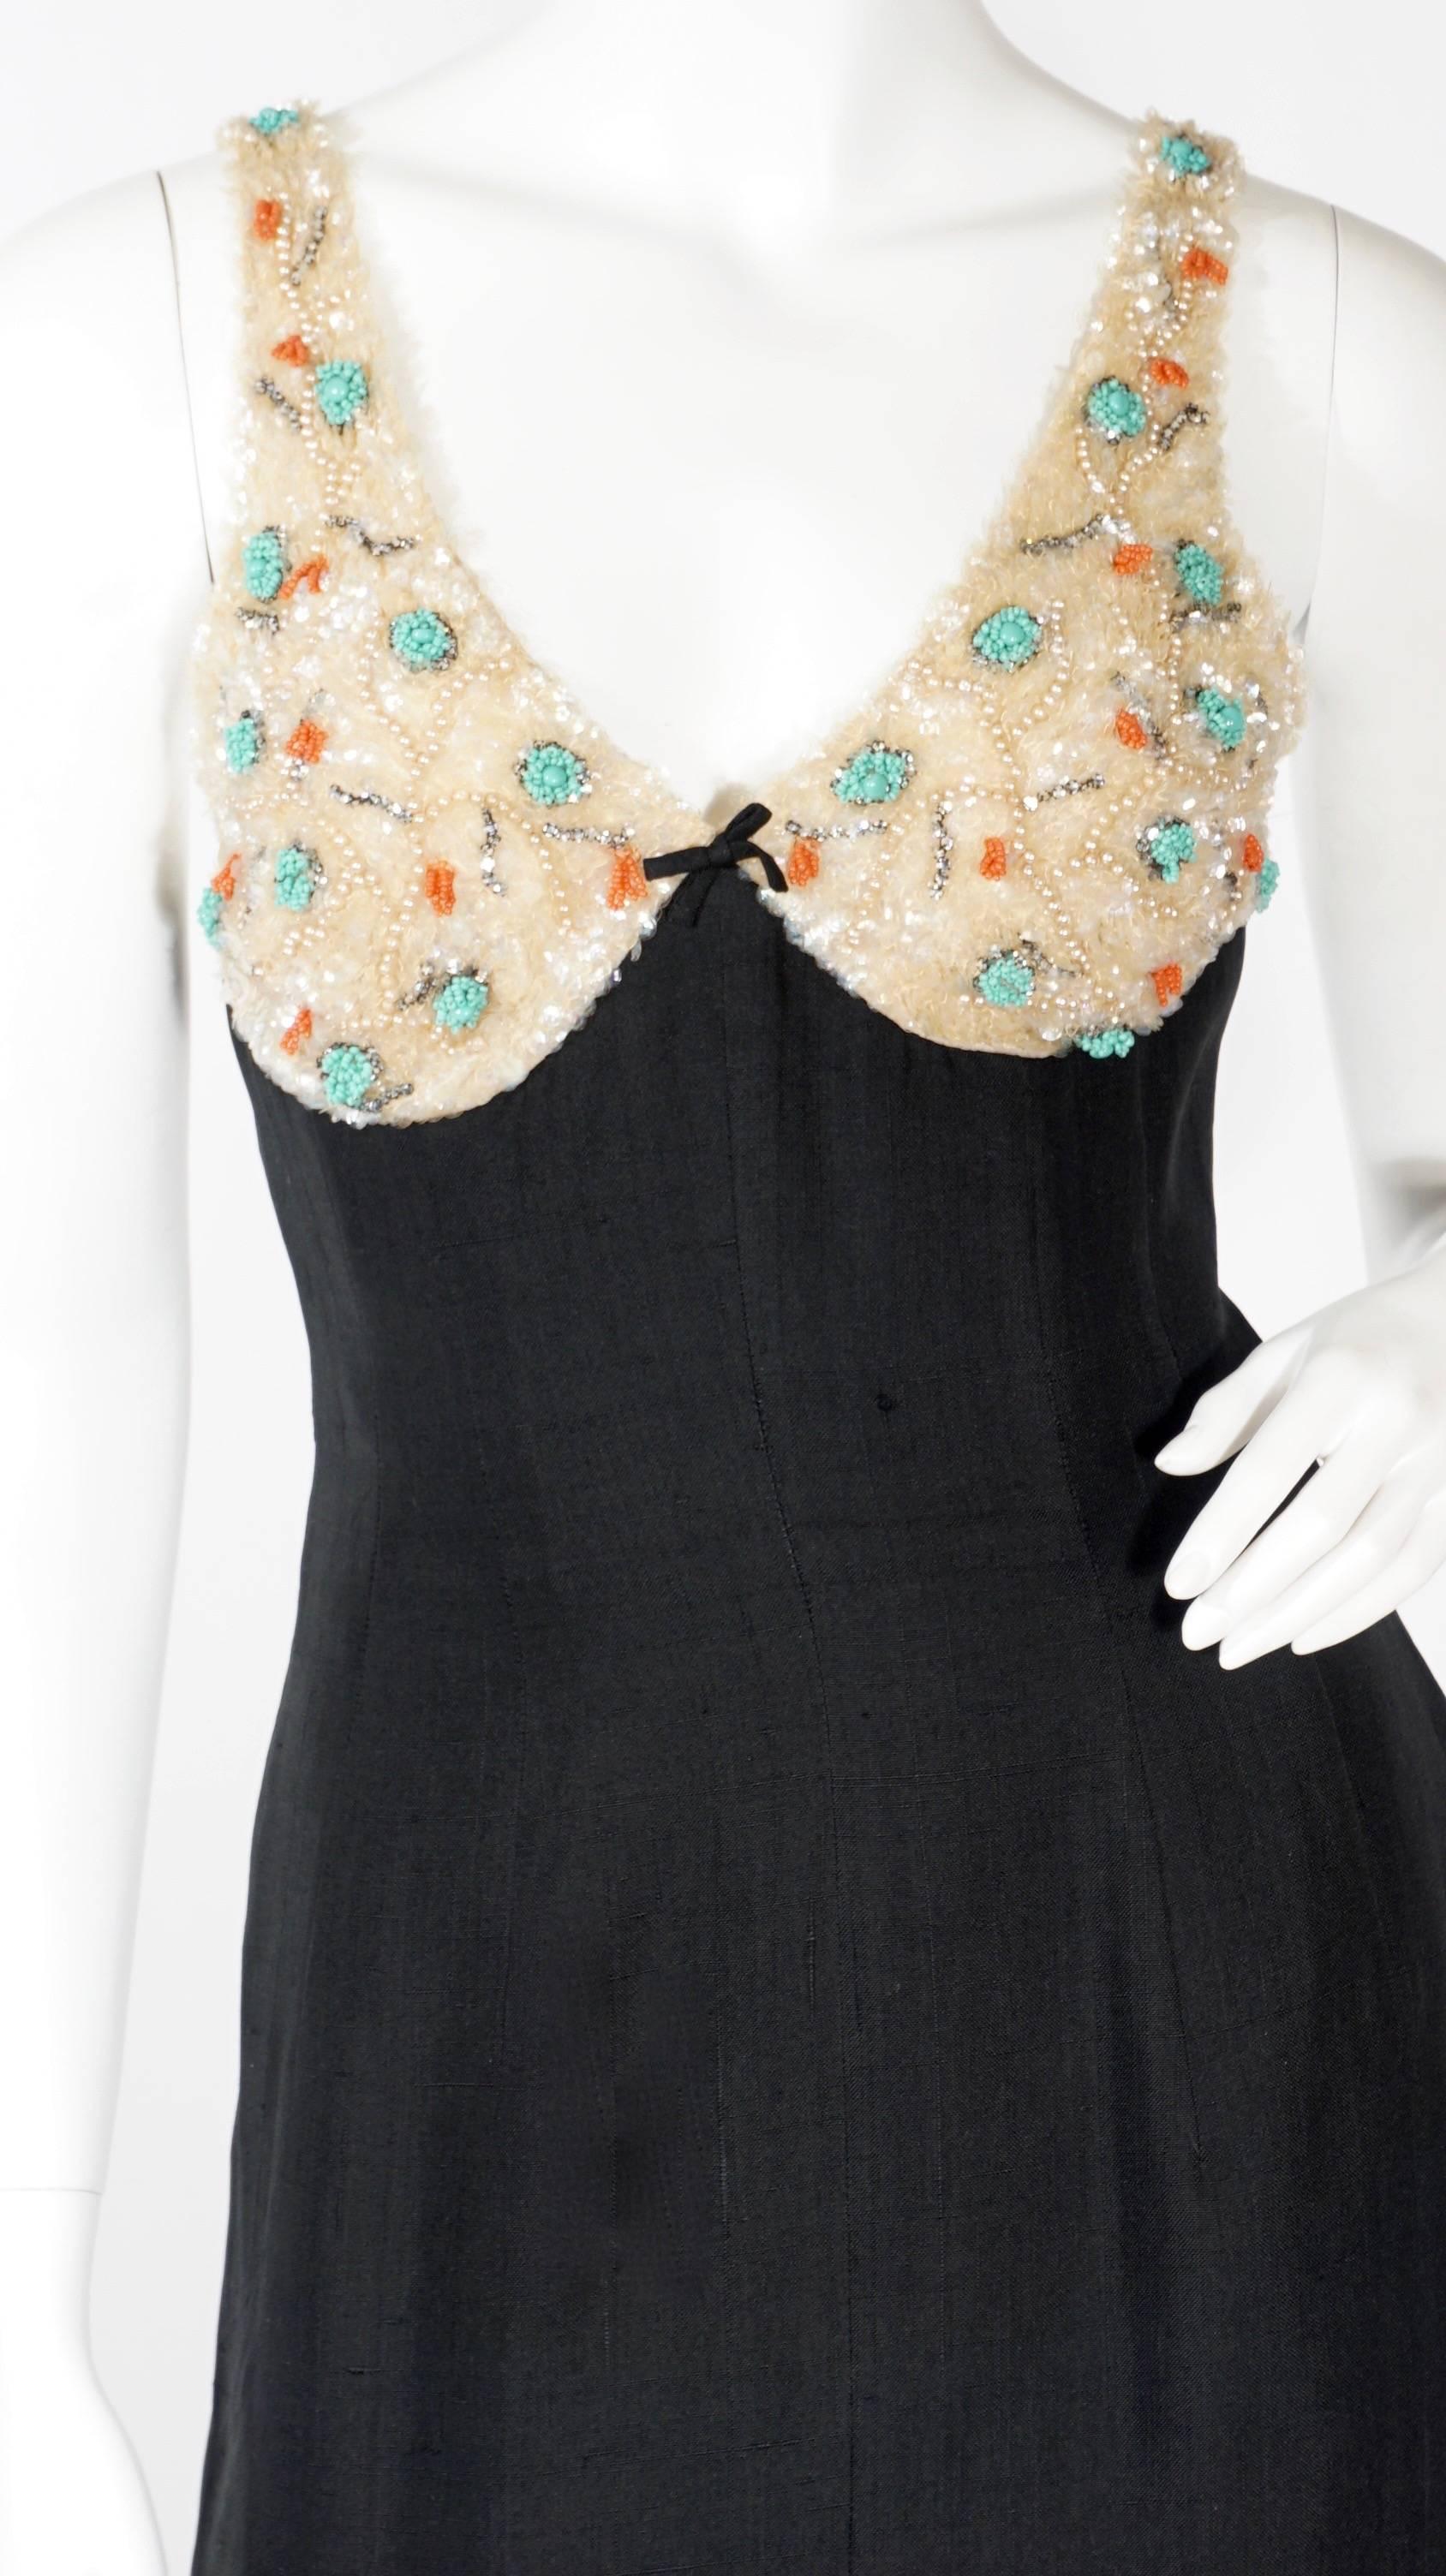 Not every bombshell gets to own a killer dress like this totally unique 1960s Mr. Blackwell original silk cocktail number with intricate beading in rhinestones, pearls and sequins along the boned bodice and straps. Very good condition.
